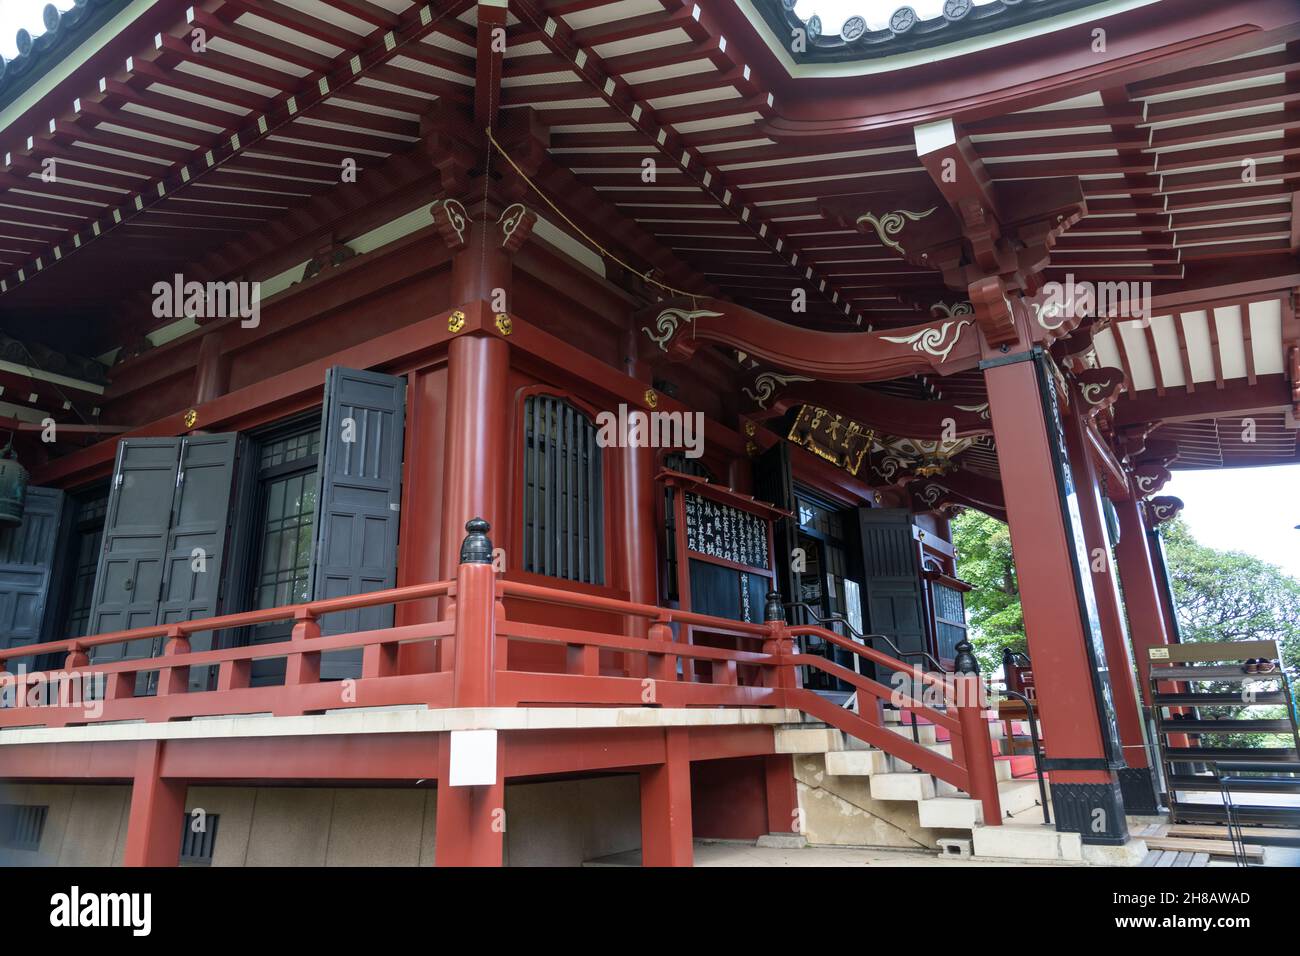 Main temple building at the Honryuin Temple, a Buddhist shrine dedicated to the god Kangiten in Asakusa, Tokyo, Japan. Daikon radishes are found at the shrine as a offering  for answered prayers. Stock Photo